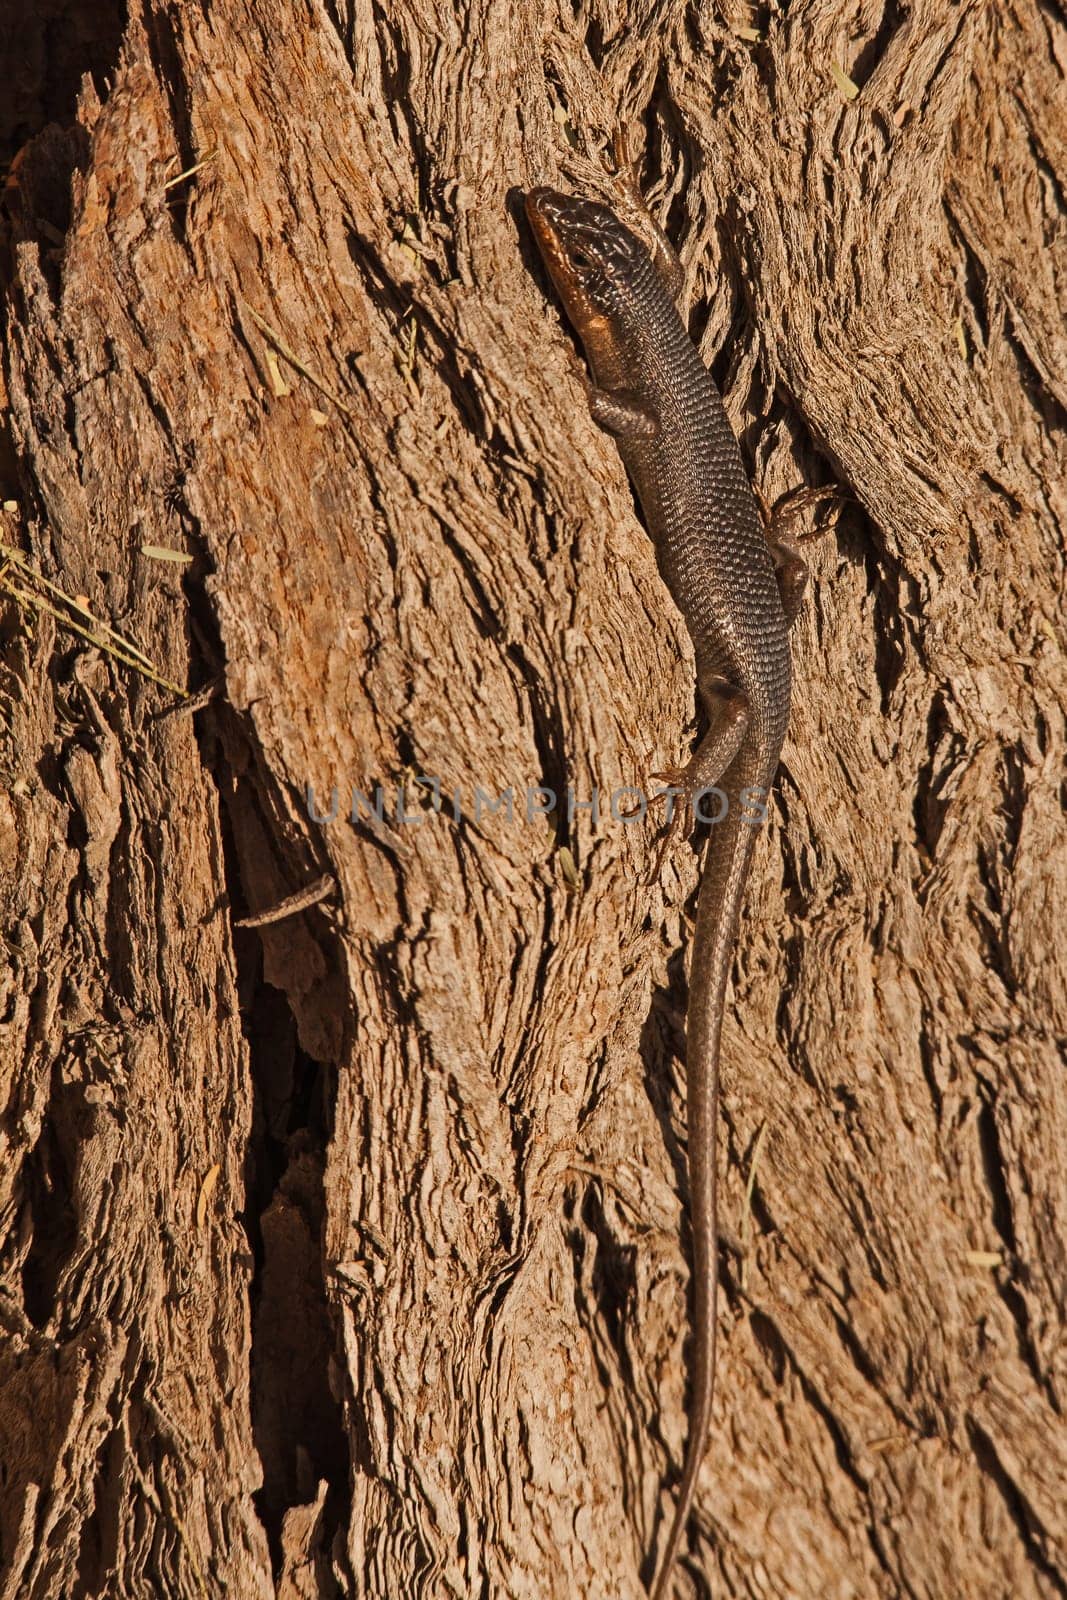 Western Rock Skink Trachylepis sulcata 4611 by kobus_peche